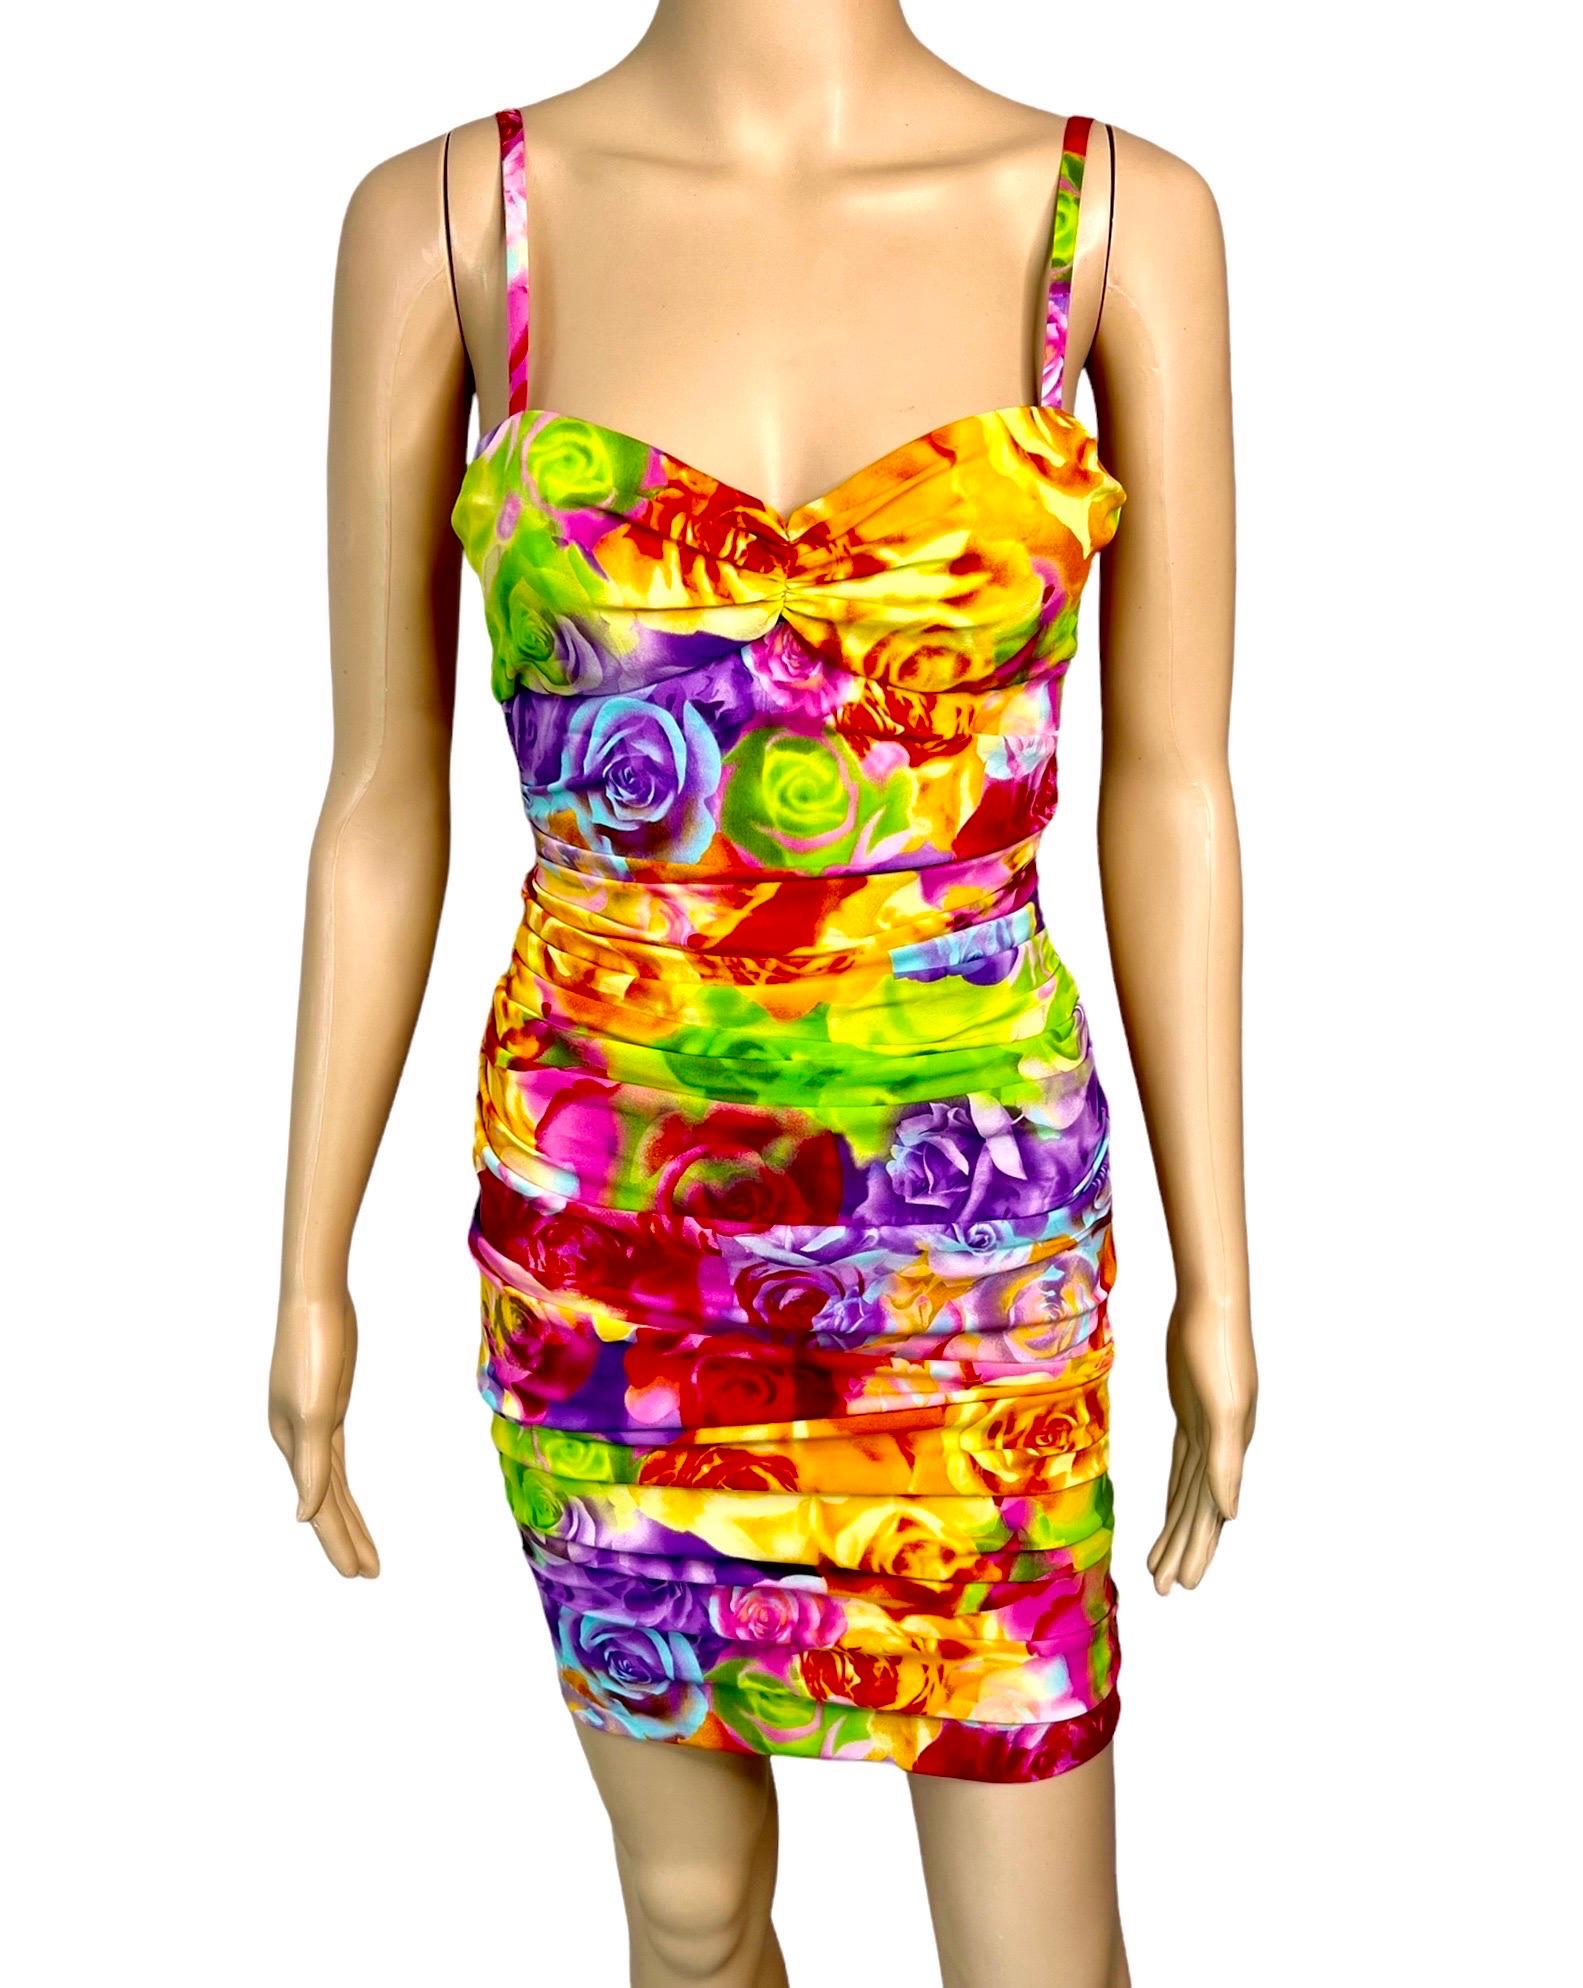 Versace S/S 2005 Bustier Bra Floral Print Bodycon Ruched Dress IT 40

Please note, based on preference the length of the dress is adjustable depending on how the client would like to style it, ruched up for a mini dress look or pulled down for a